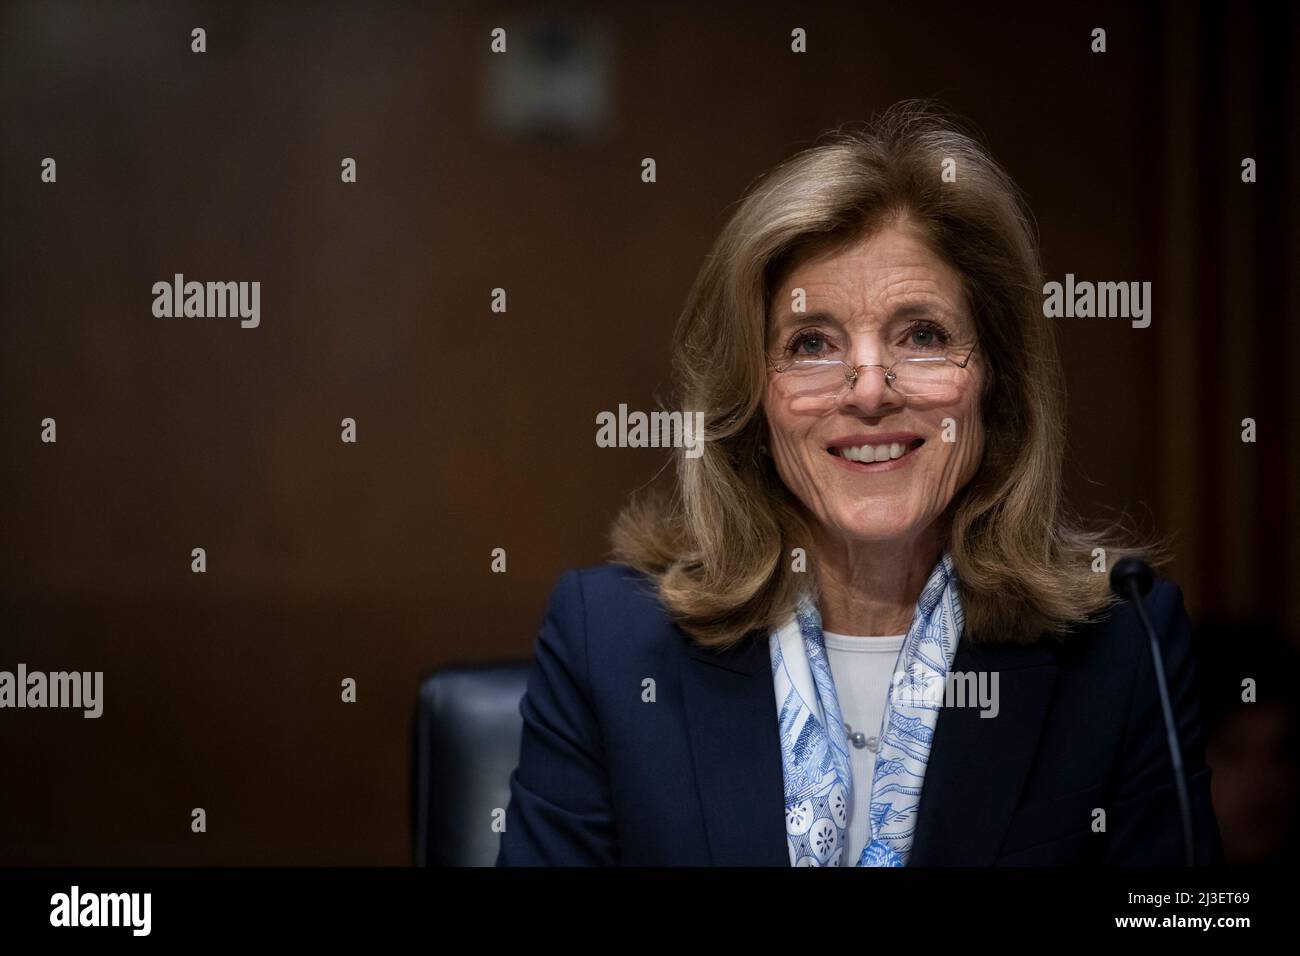 Caroline Kennedy appears before a Senate Committee on Foreign Relations hearing for her nomination to be Ambassador to the Commonwealth of Australia, in the Dirksen Senate Office Building in Washington, DC, USA, Thursday, April 7, 2022. Photo by Rod Lamkey/CNP/ABACAPRESS.COM Stock Photo